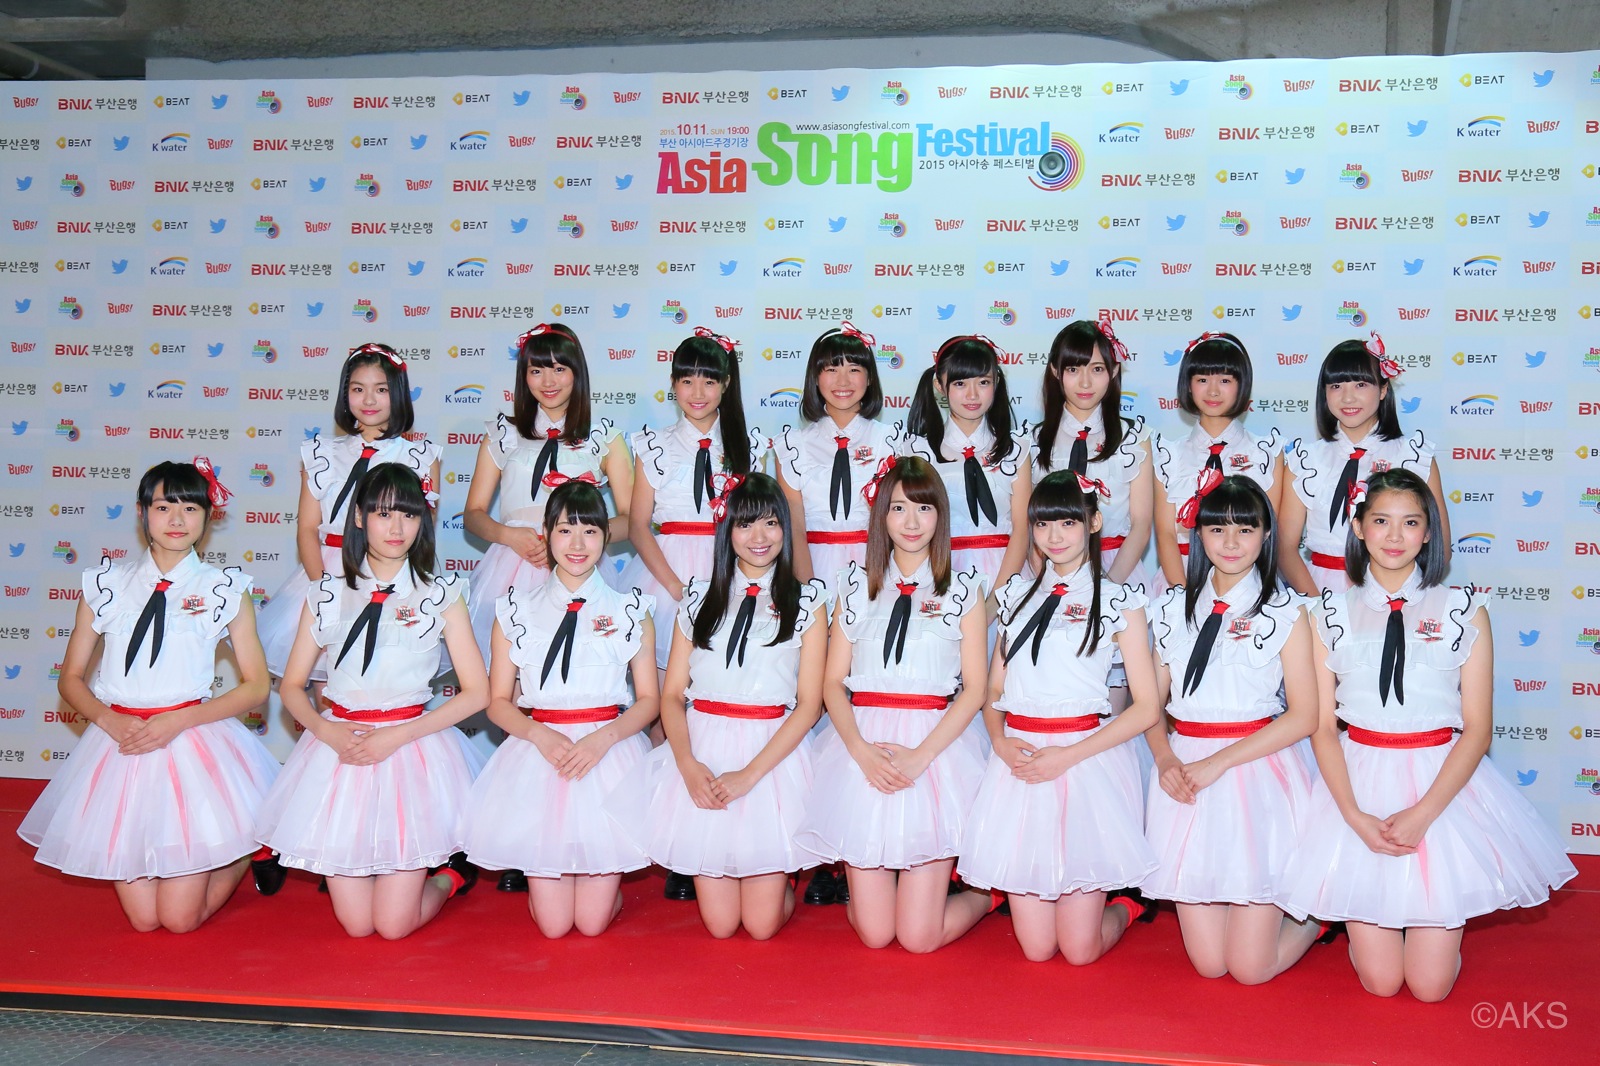 NGT48 Fly High With First Overseas Performance at Asia Song Festival 2015 in South Korea!